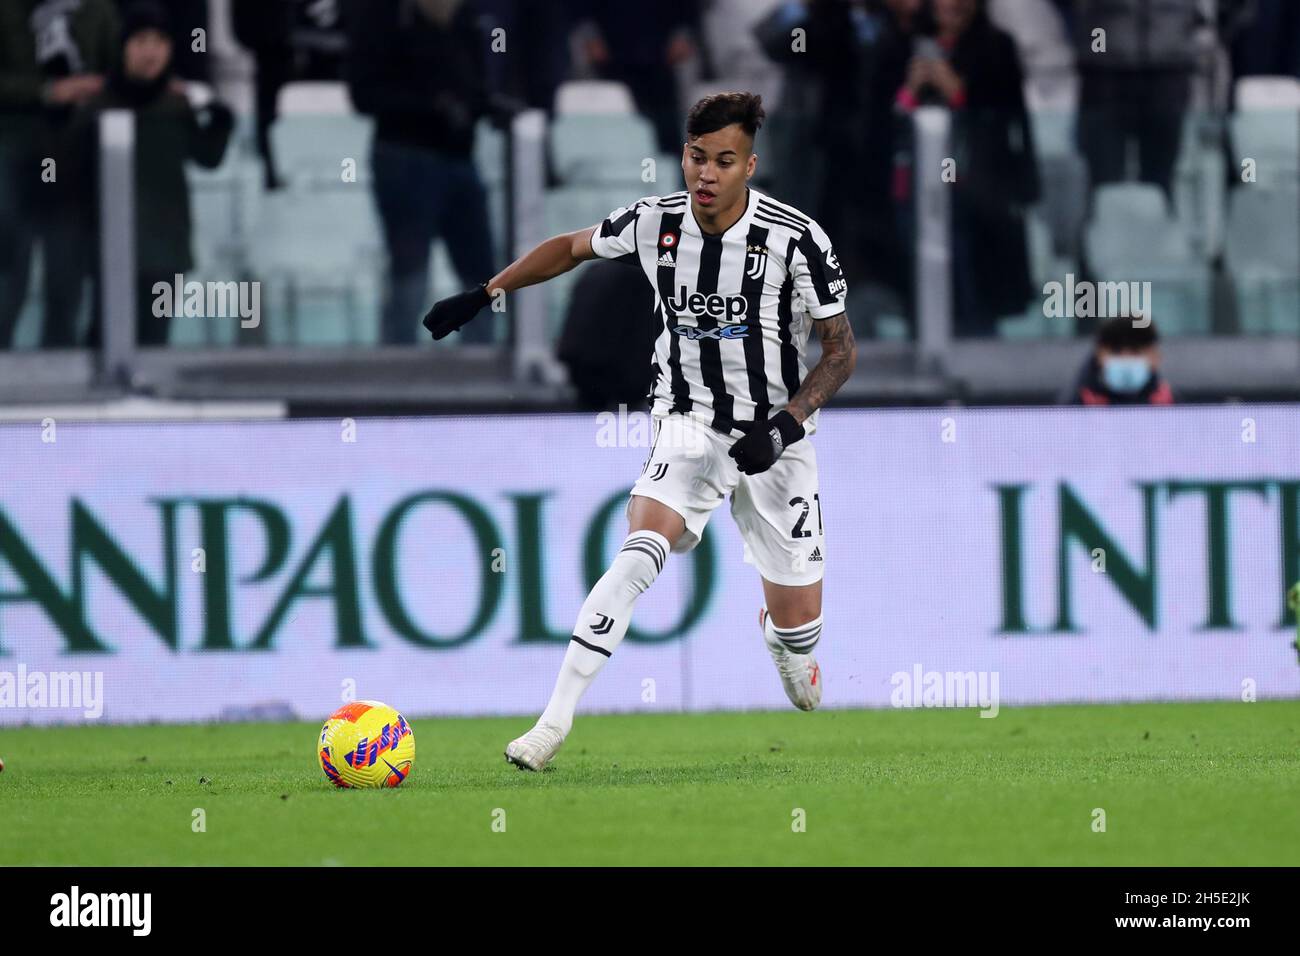 Kaio Jorge of Juventus Fc  battle for the ball during the Serie A match between Juventus Fc and Acf Fiorentina . Stock Photo